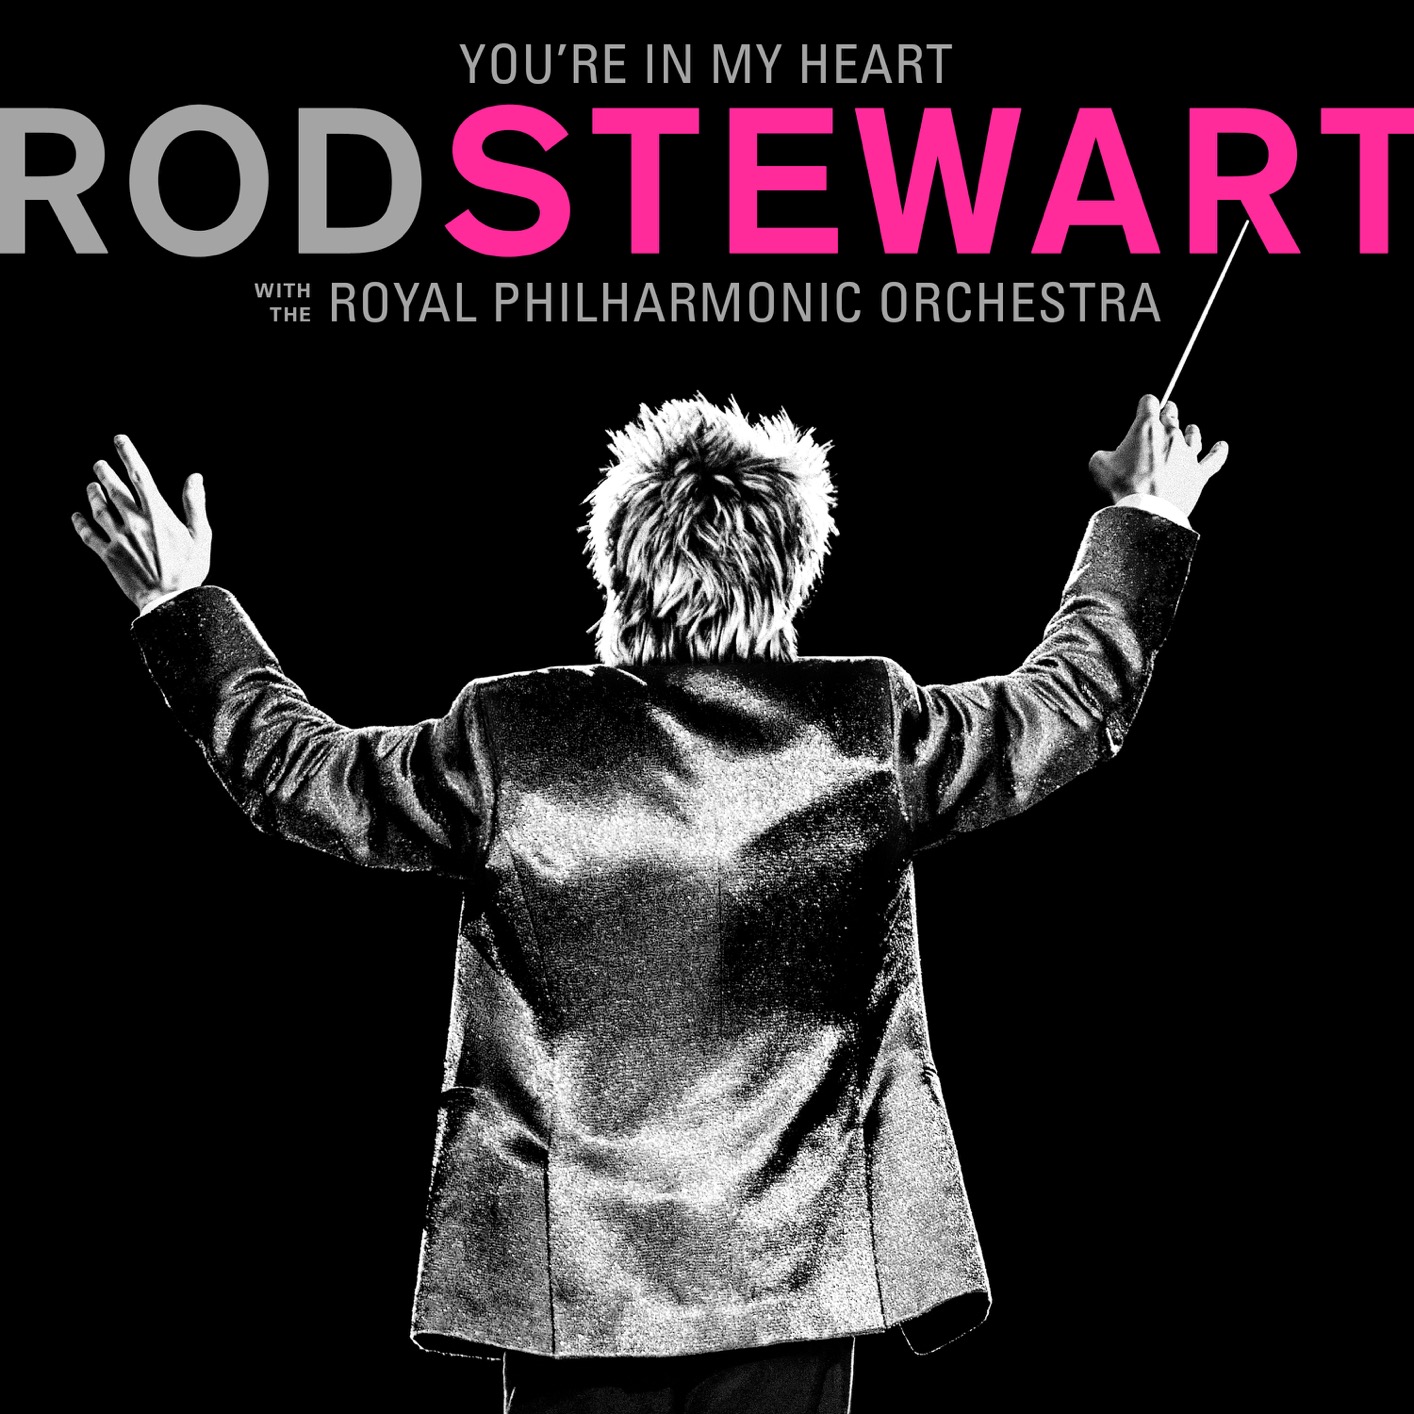 Rod Stewart – You’re In My Heart: Rod Stewart (with The Royal Philharmonic Orchestra) (2019) [FLAC 24bit/96kHz]